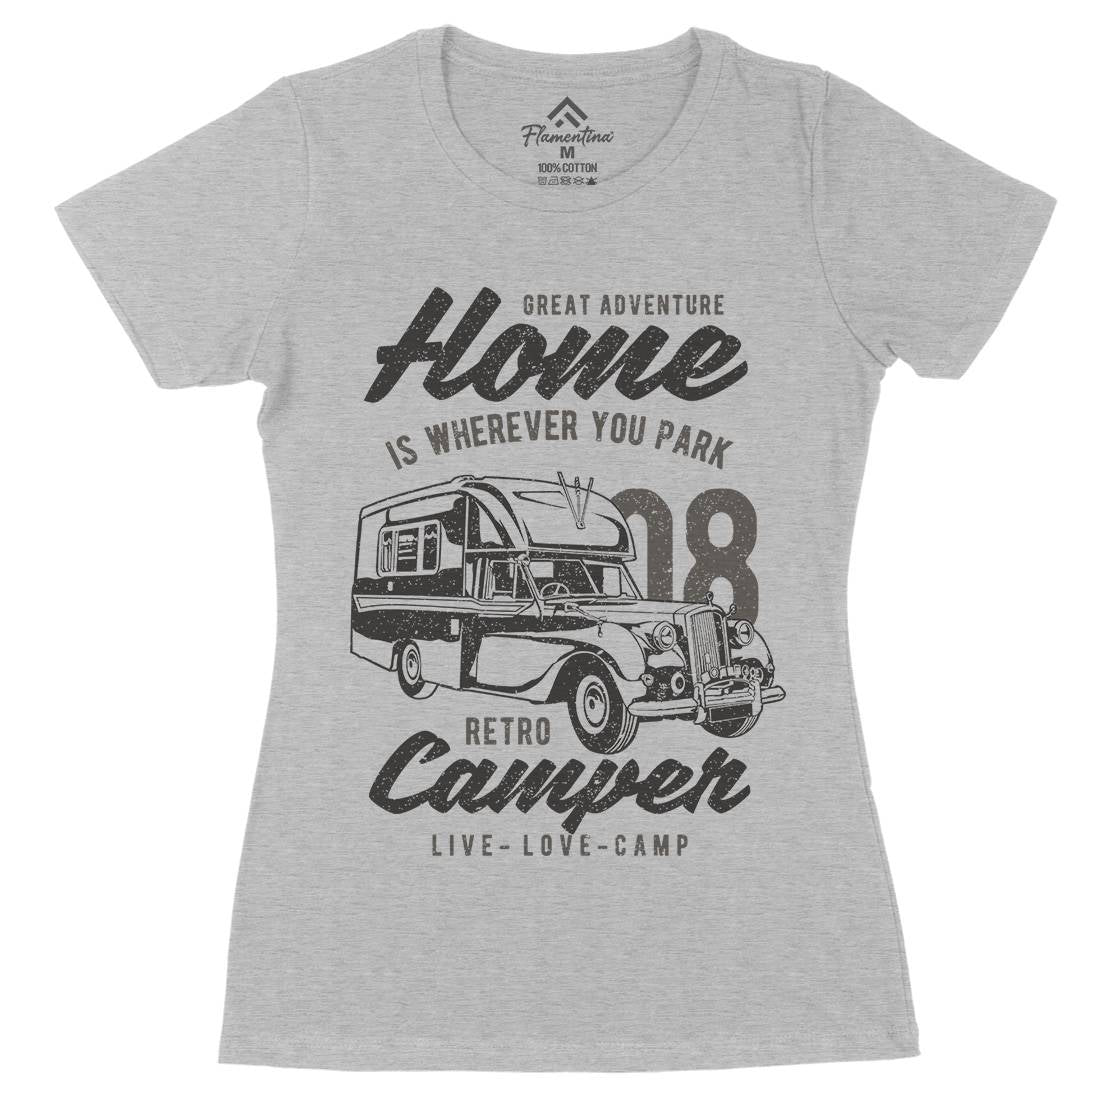 Retro Campers Womens Organic Crew Neck T-Shirt Nature A740